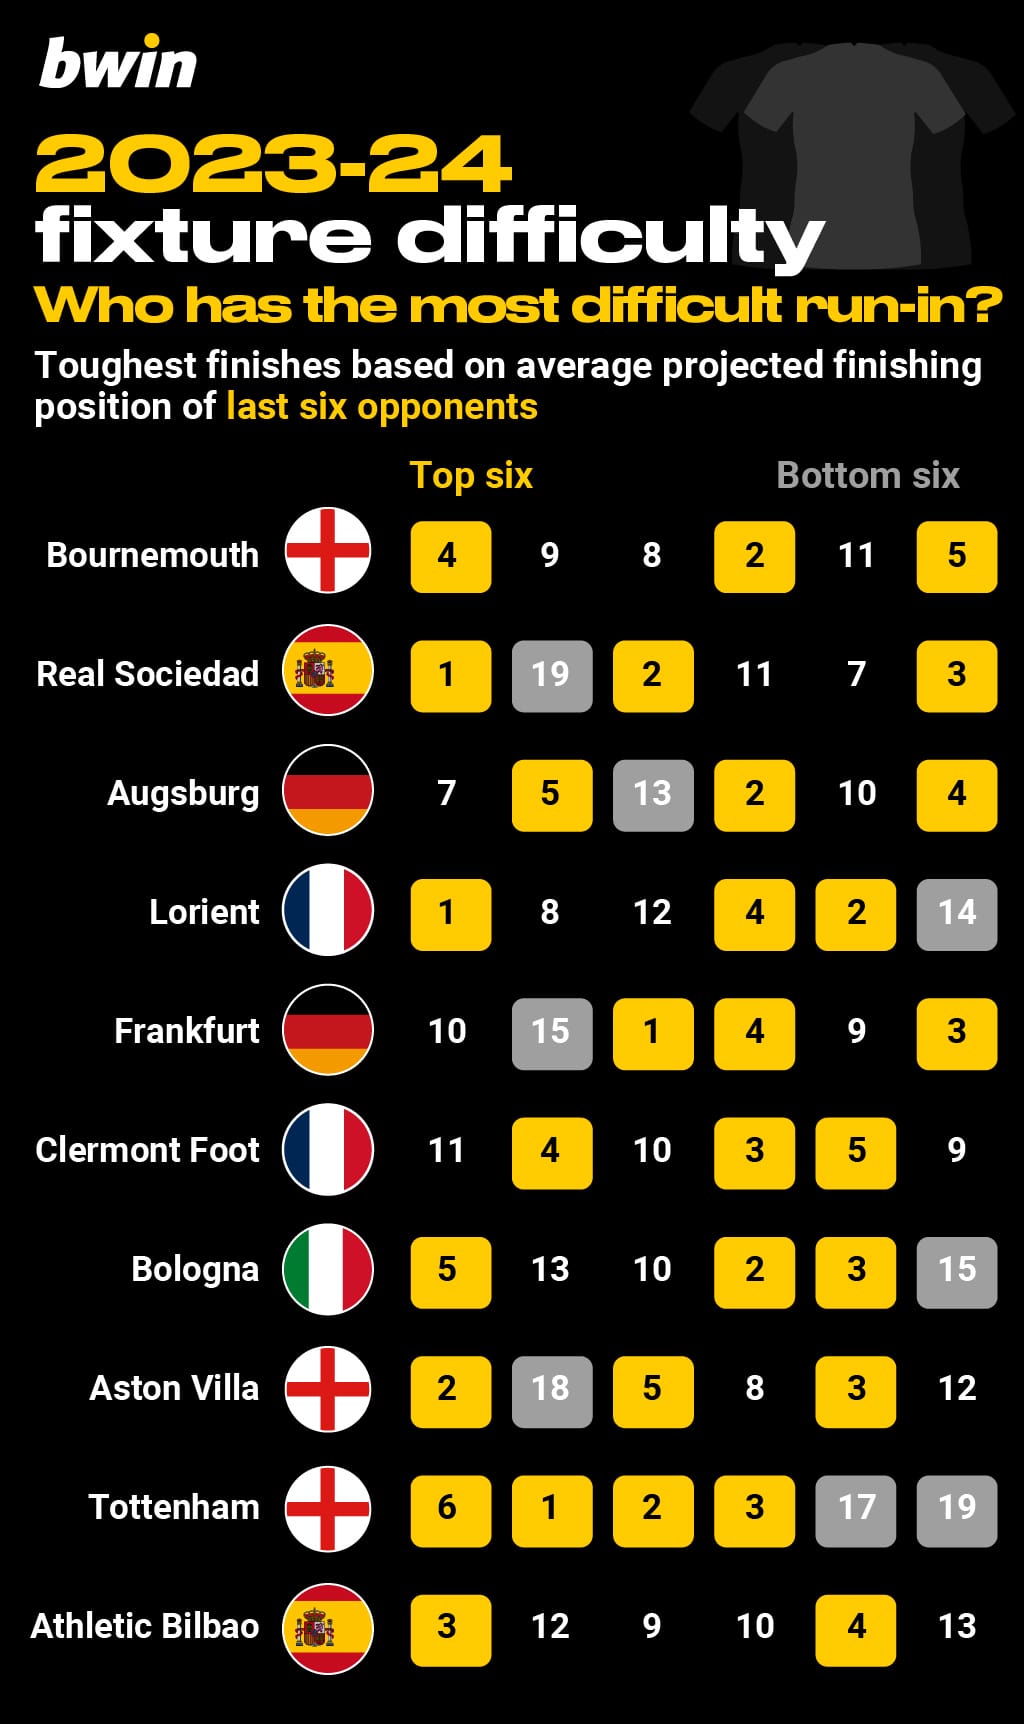 Who has the most difficult run-in from Europe's top five leagues?